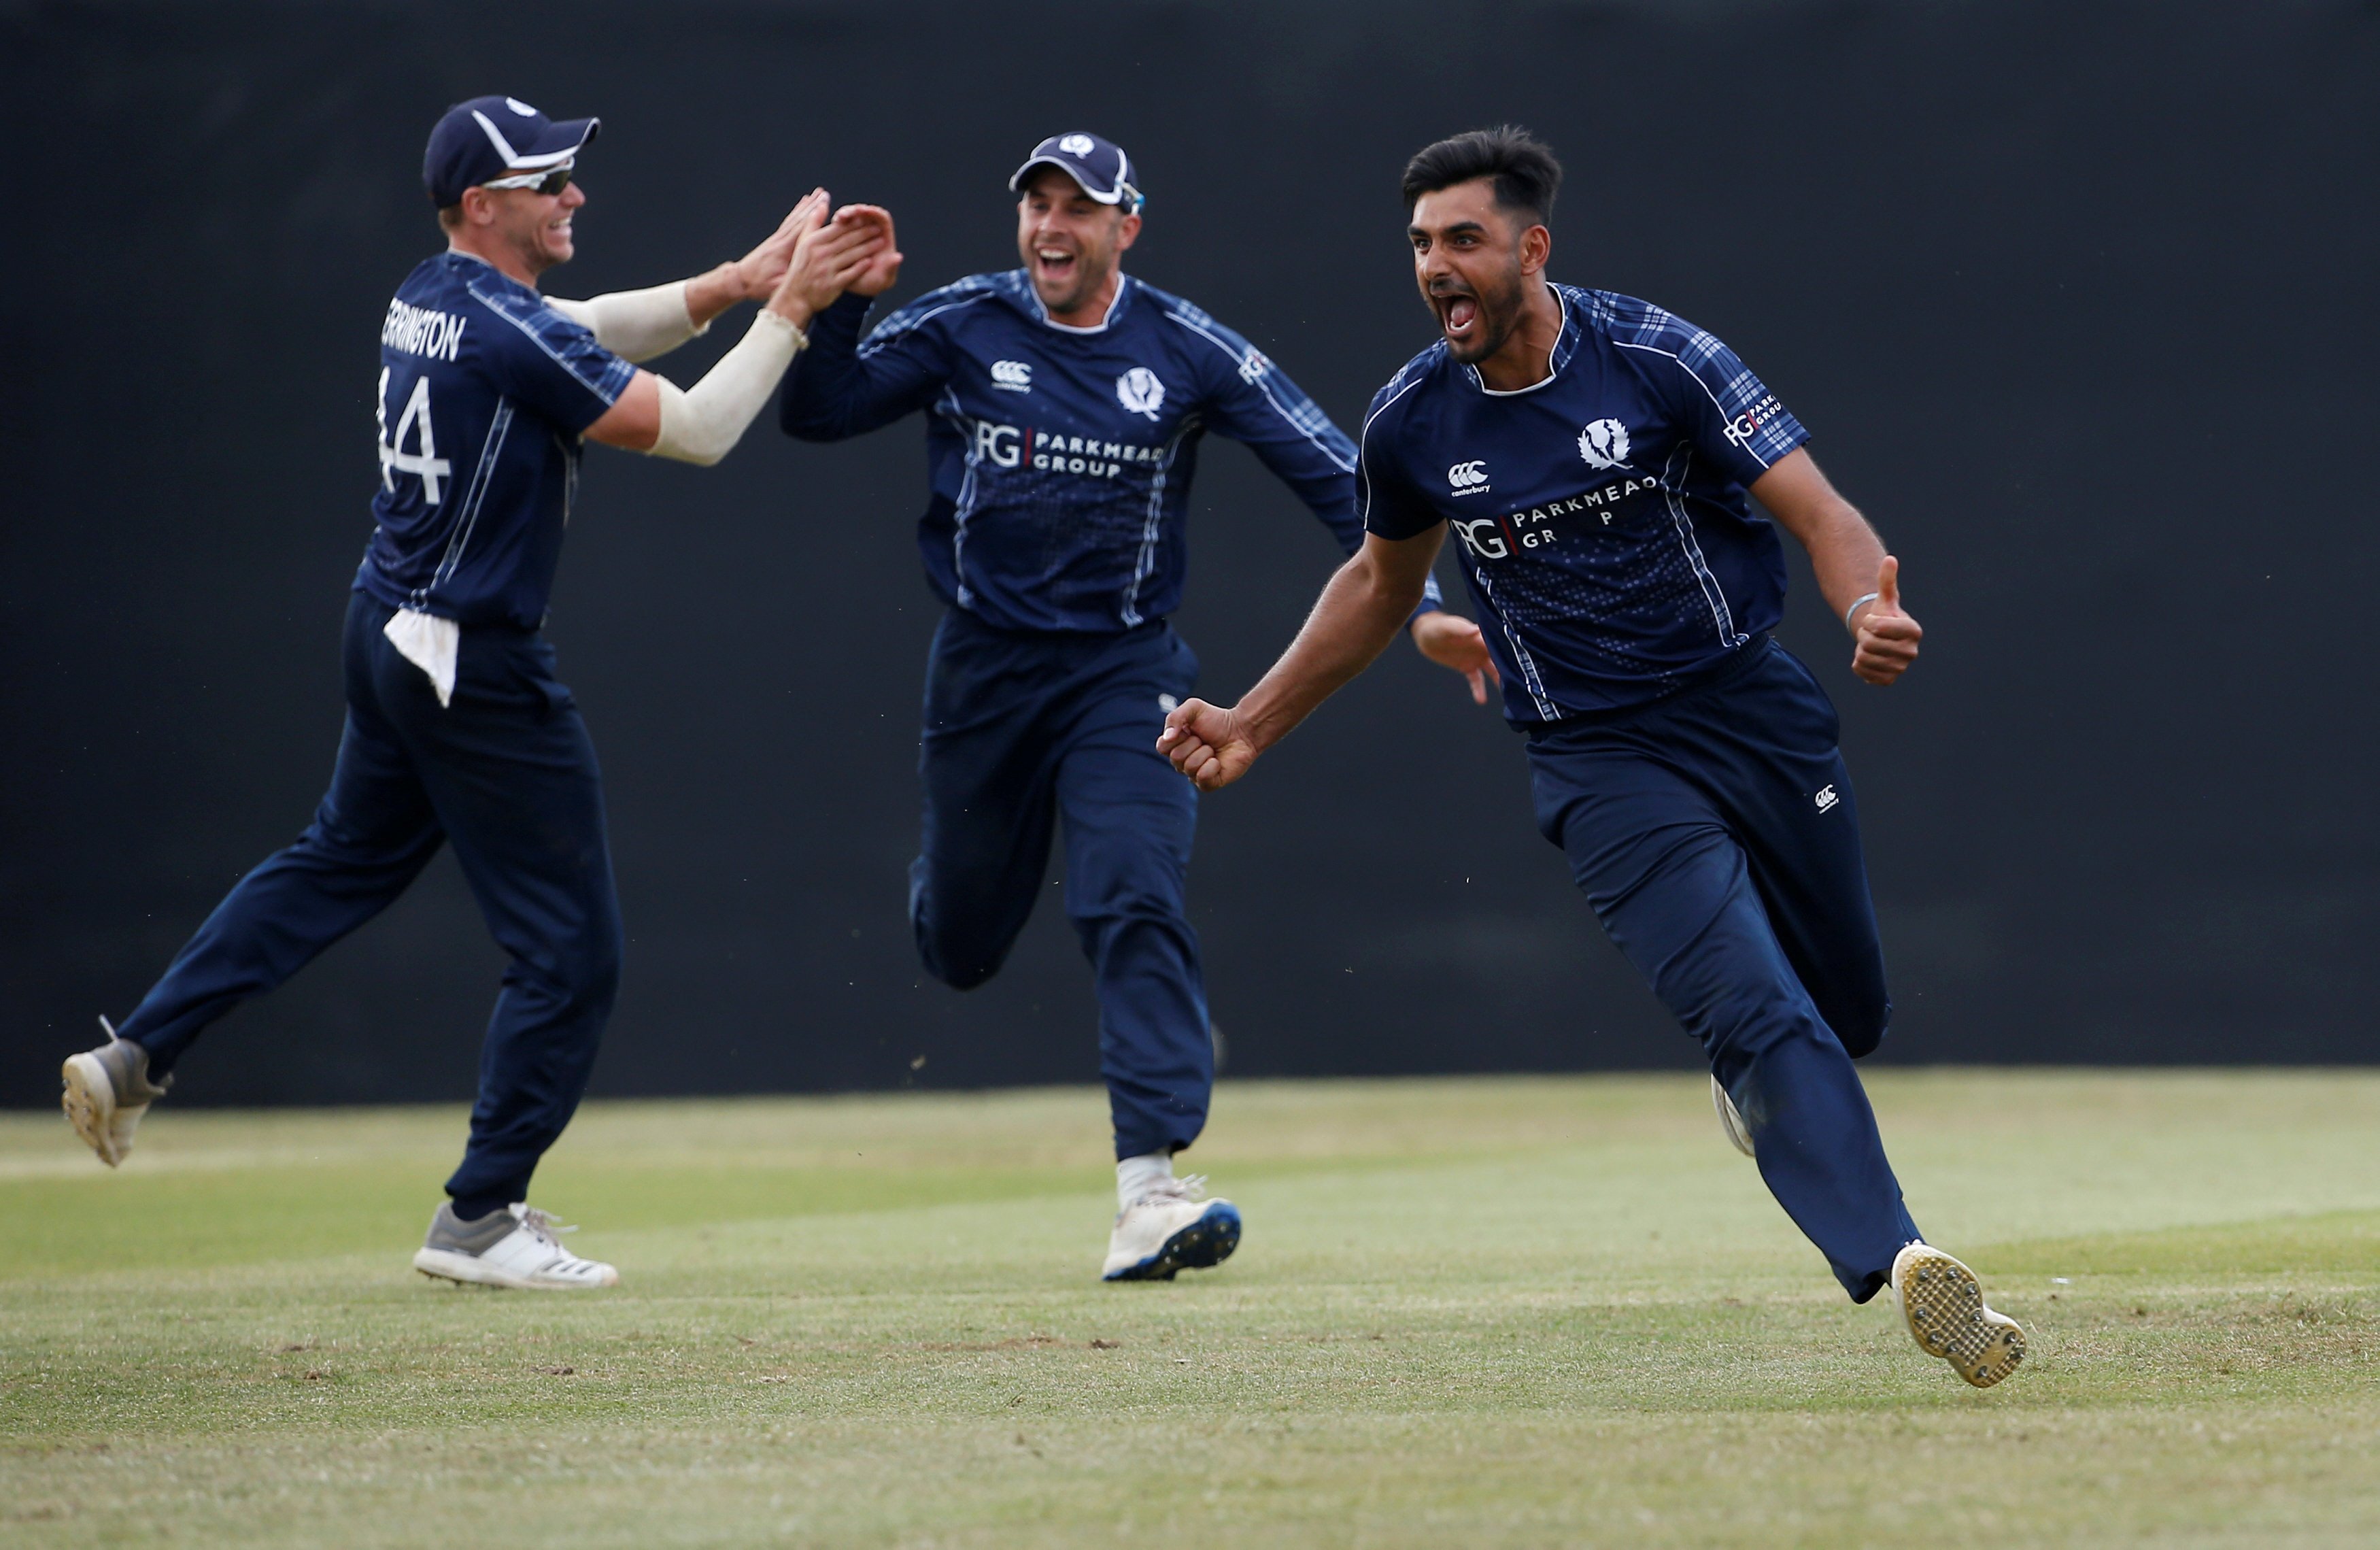 undone england s middle order collapse gave scotland a much needed six run victory in the one off odi on sunday photo afp